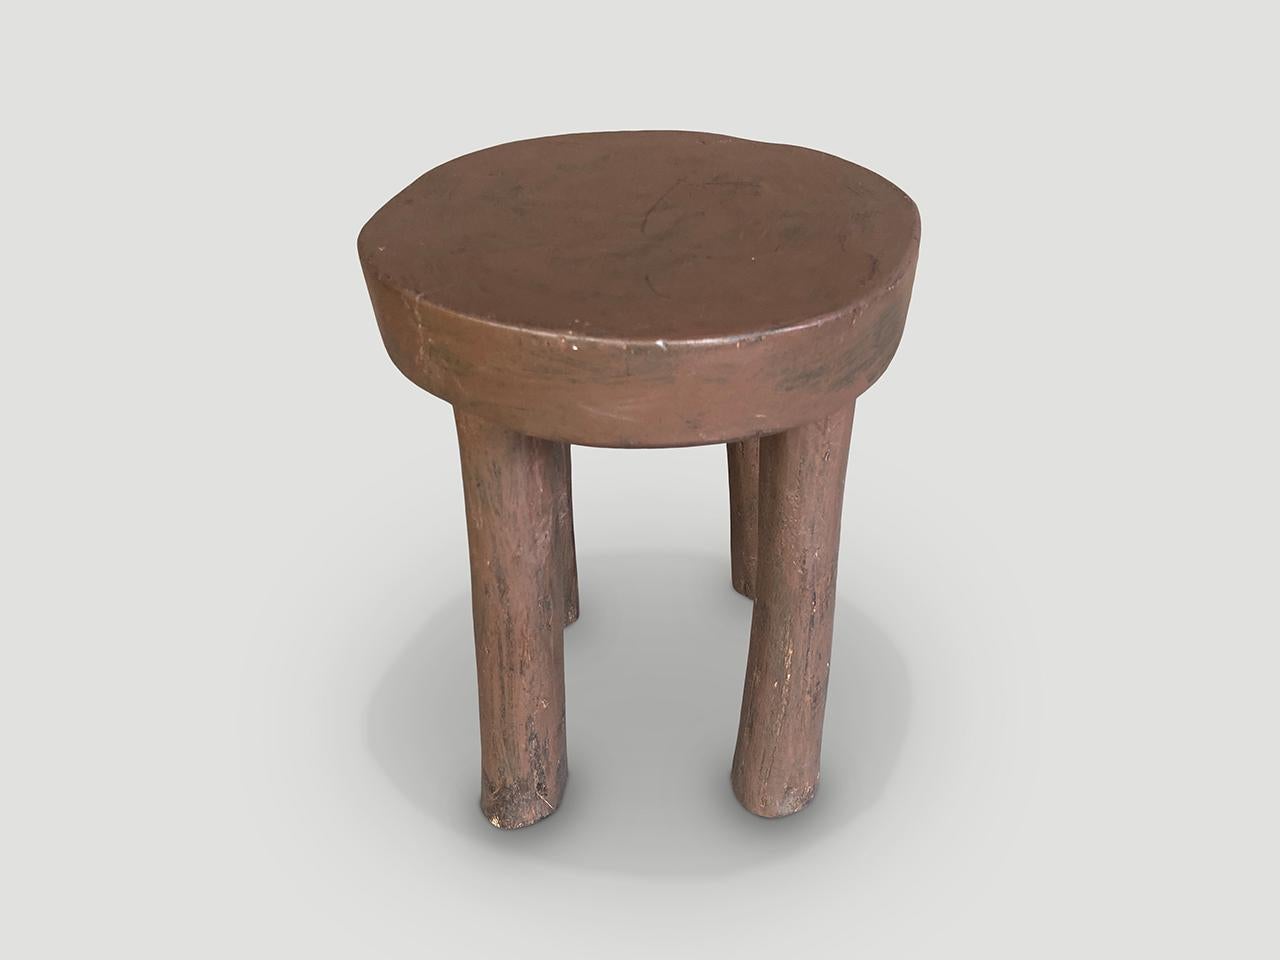 Antique African side table or stool hand carved from a single block of wood. 

This side table or stool was sourced in the spirit of Wabi-Sabi, a Japanese philosophy that beauty can be found in imperfection and impermanence. It is a beauty of